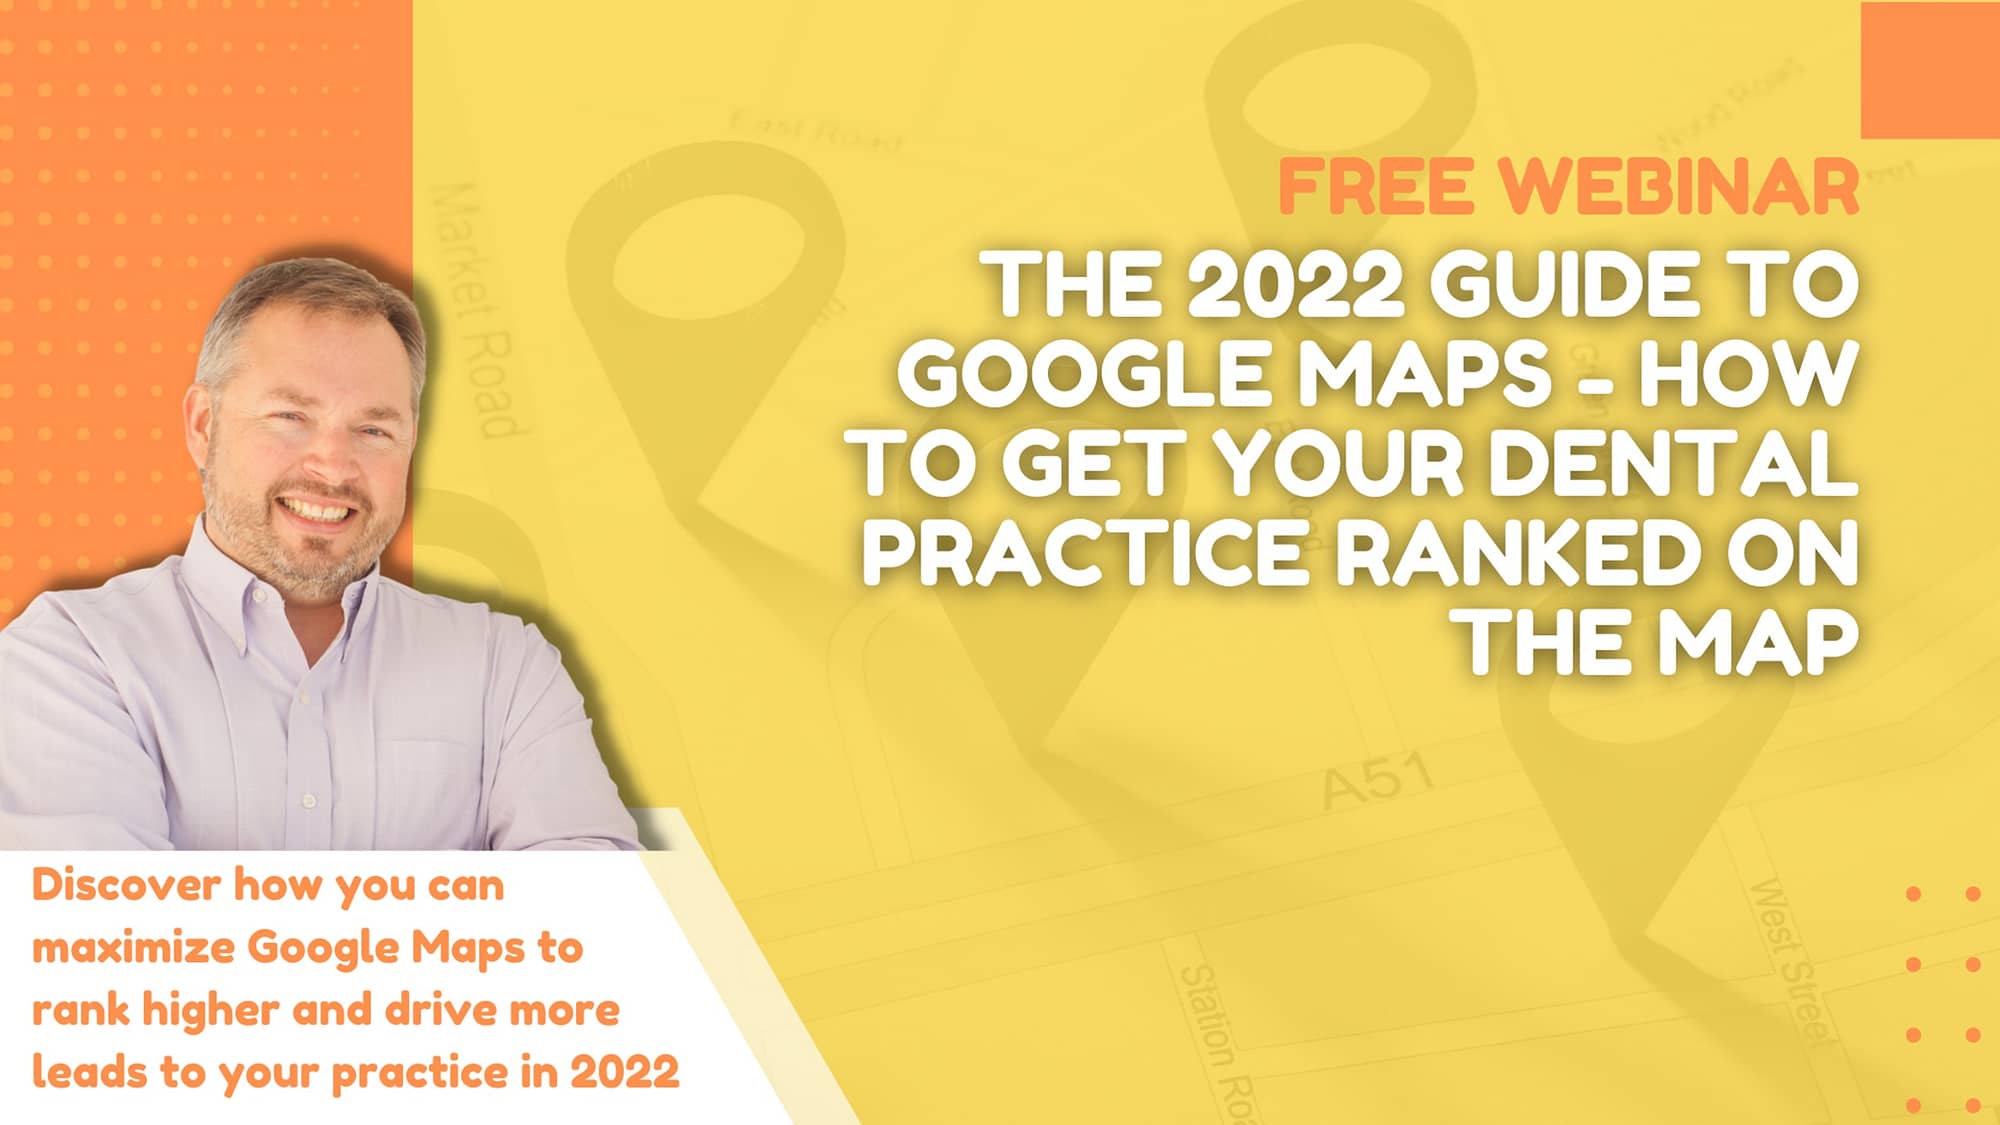 2022 guide to Google Maps